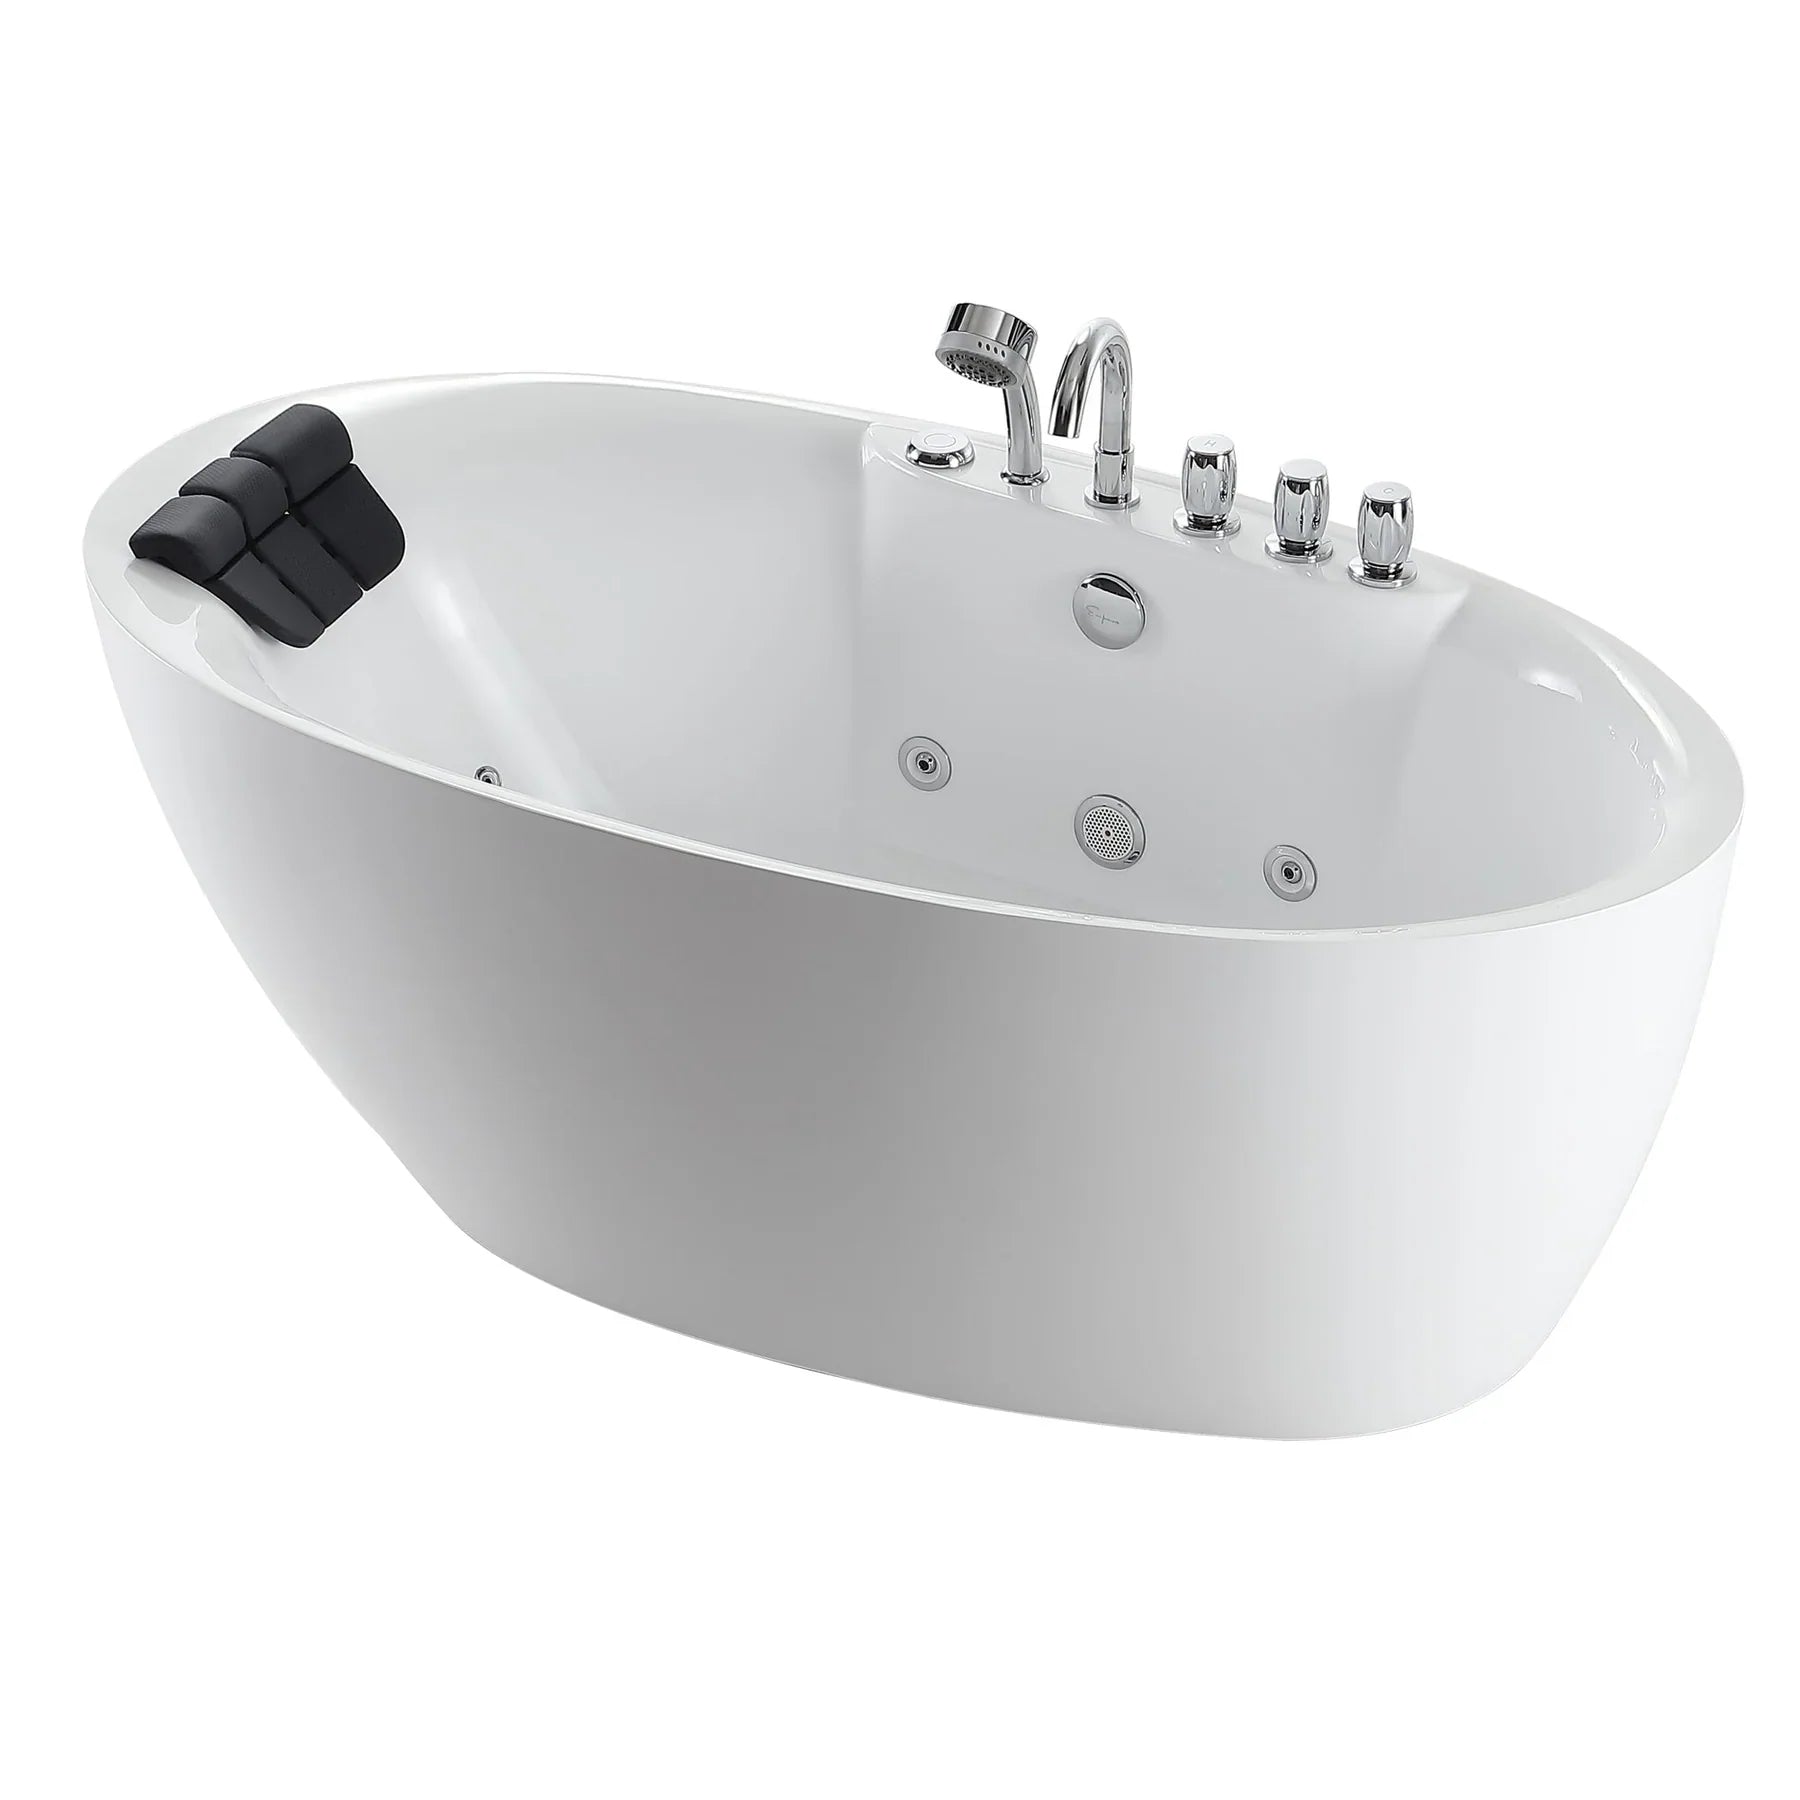 Empava 71 in. Freestanding Jetted Bathtub in White Acrylic (971AIS14)